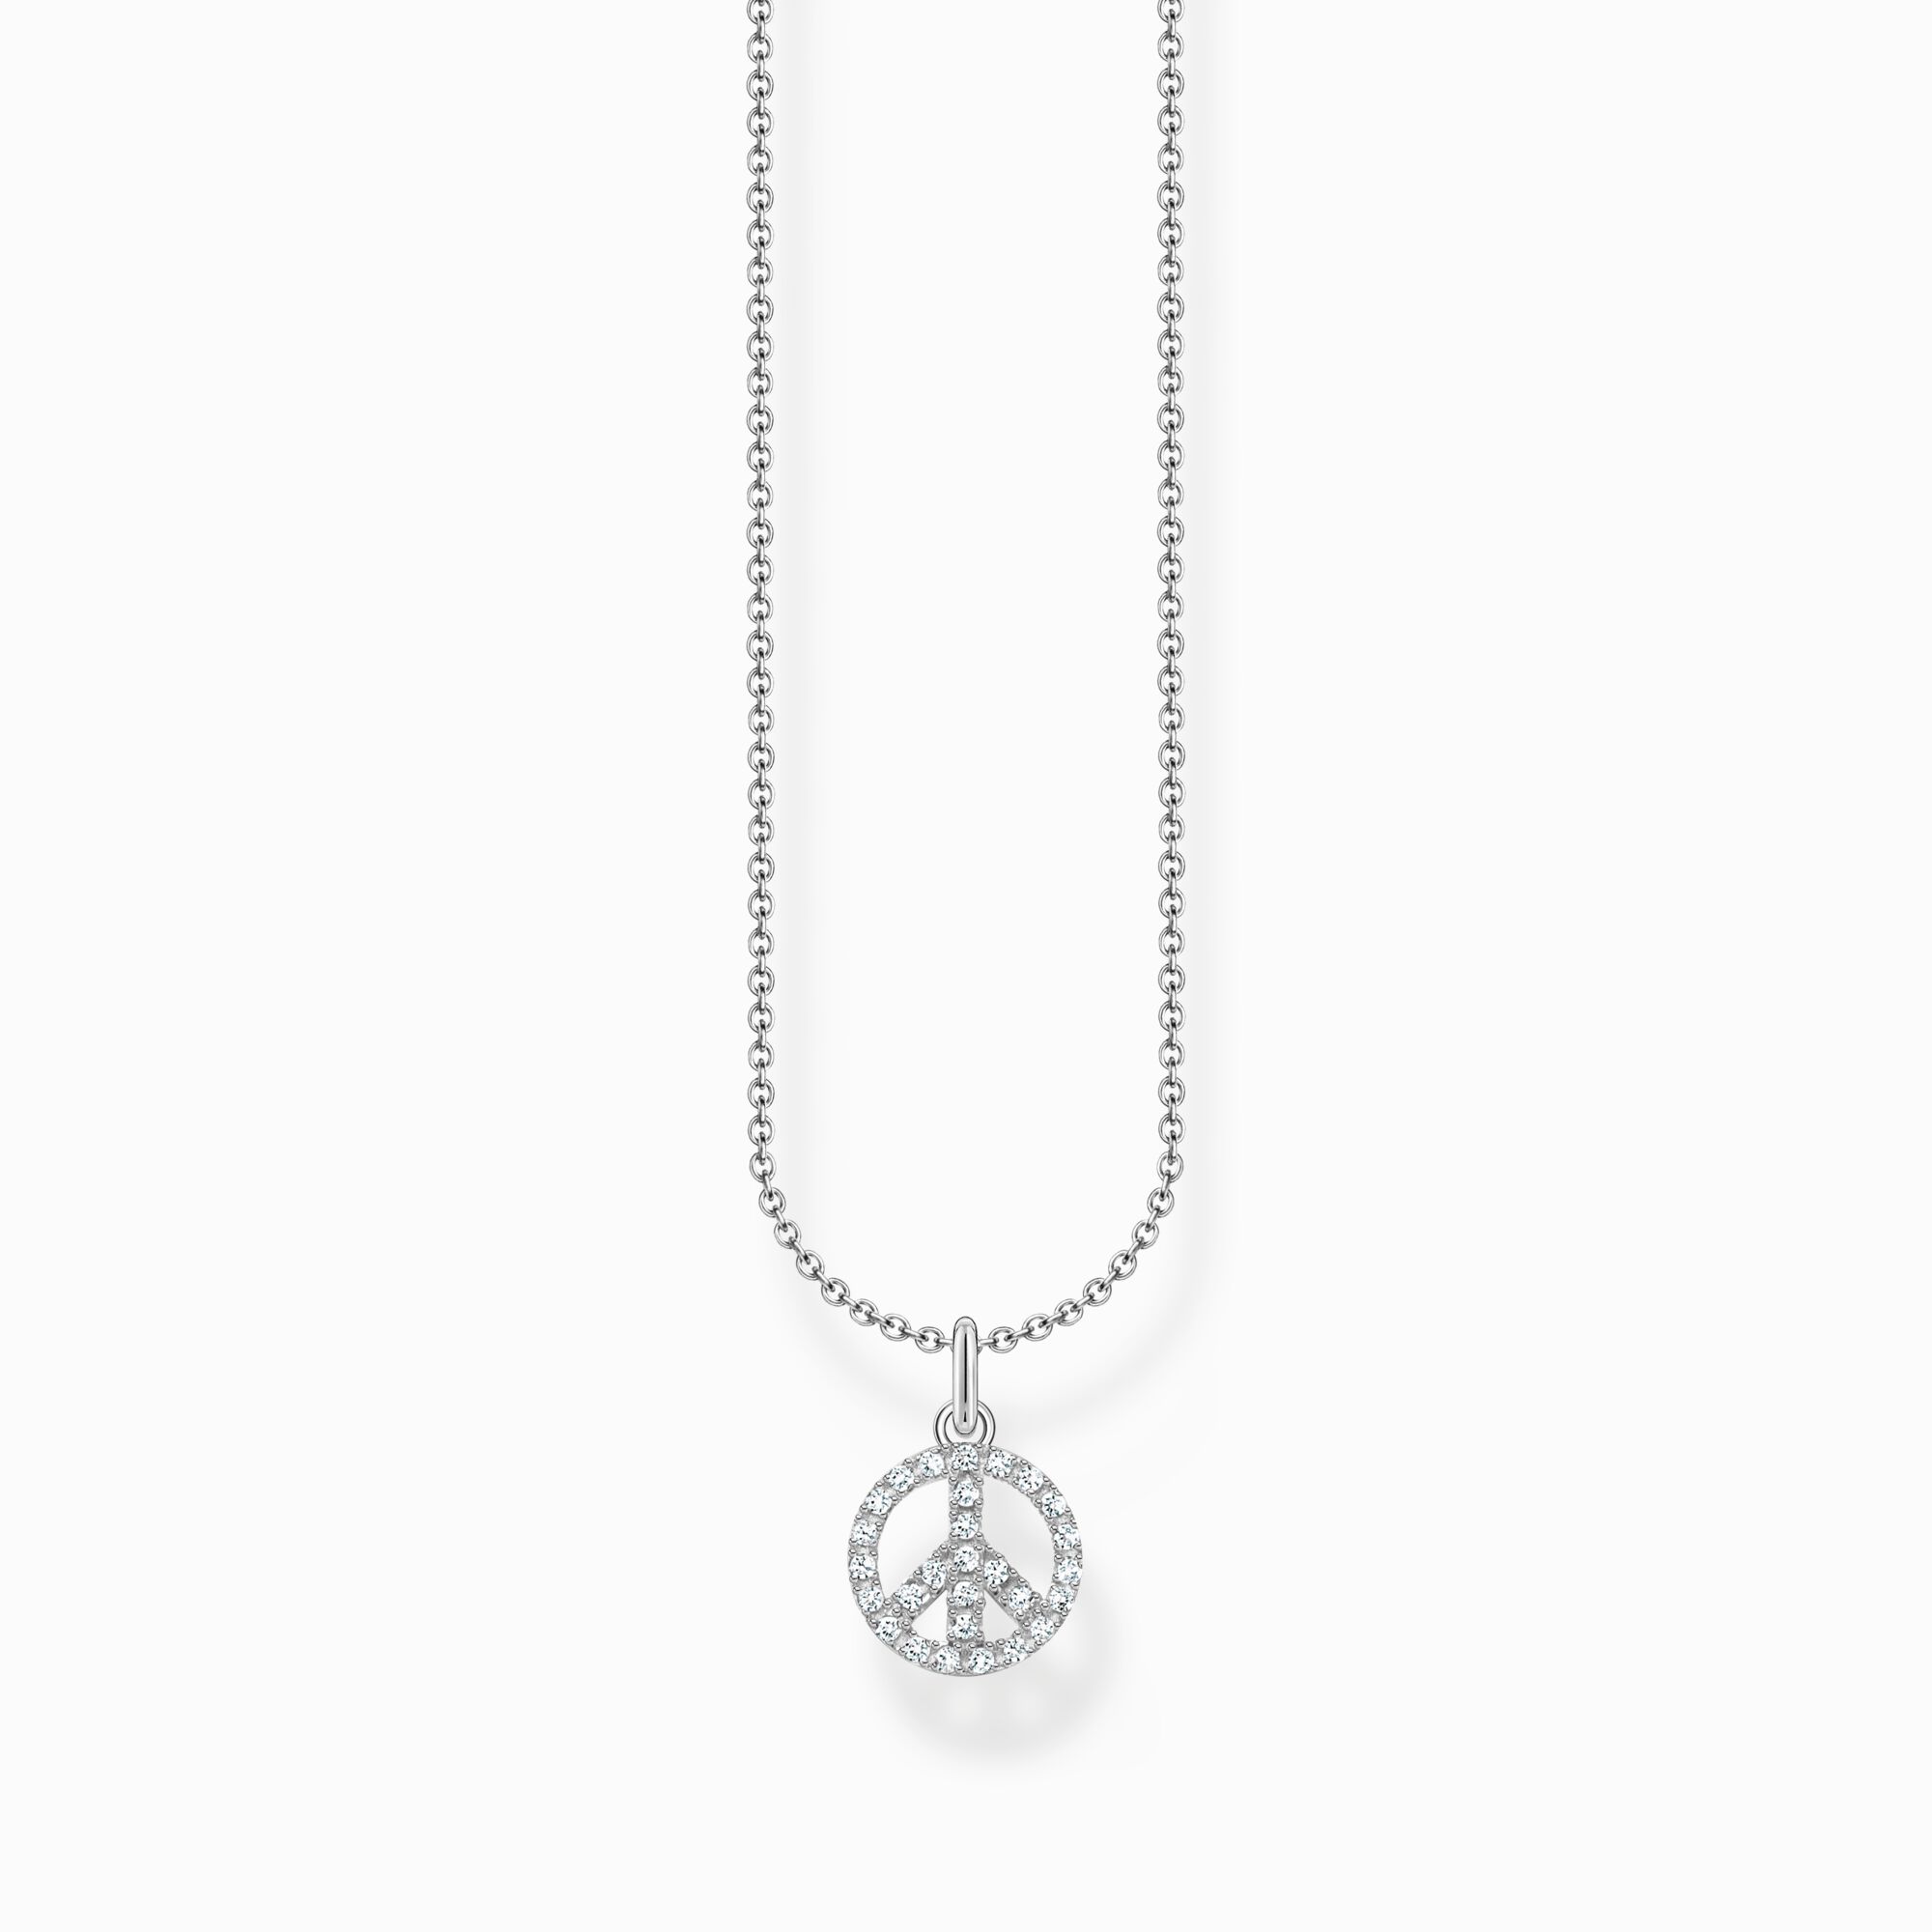 Necklace peace with white stones silver from the Charming Collection collection in the THOMAS SABO online store